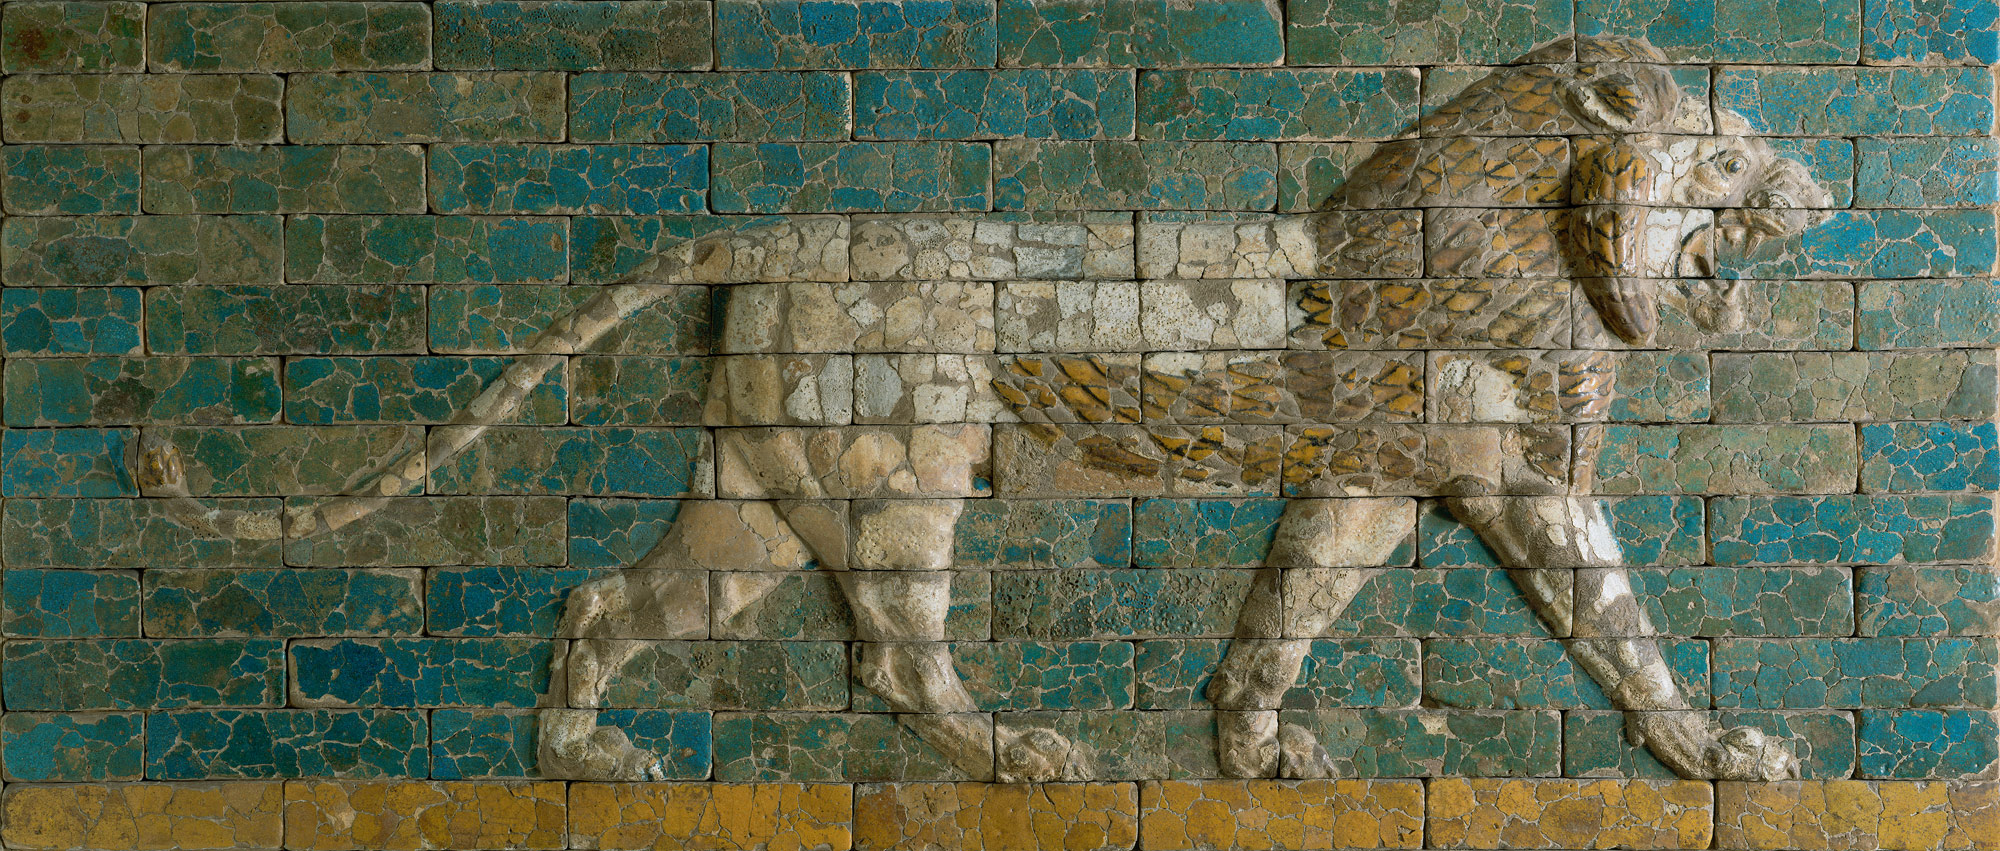 Blue tile imagery from Ishtar's gate of a lion with wings